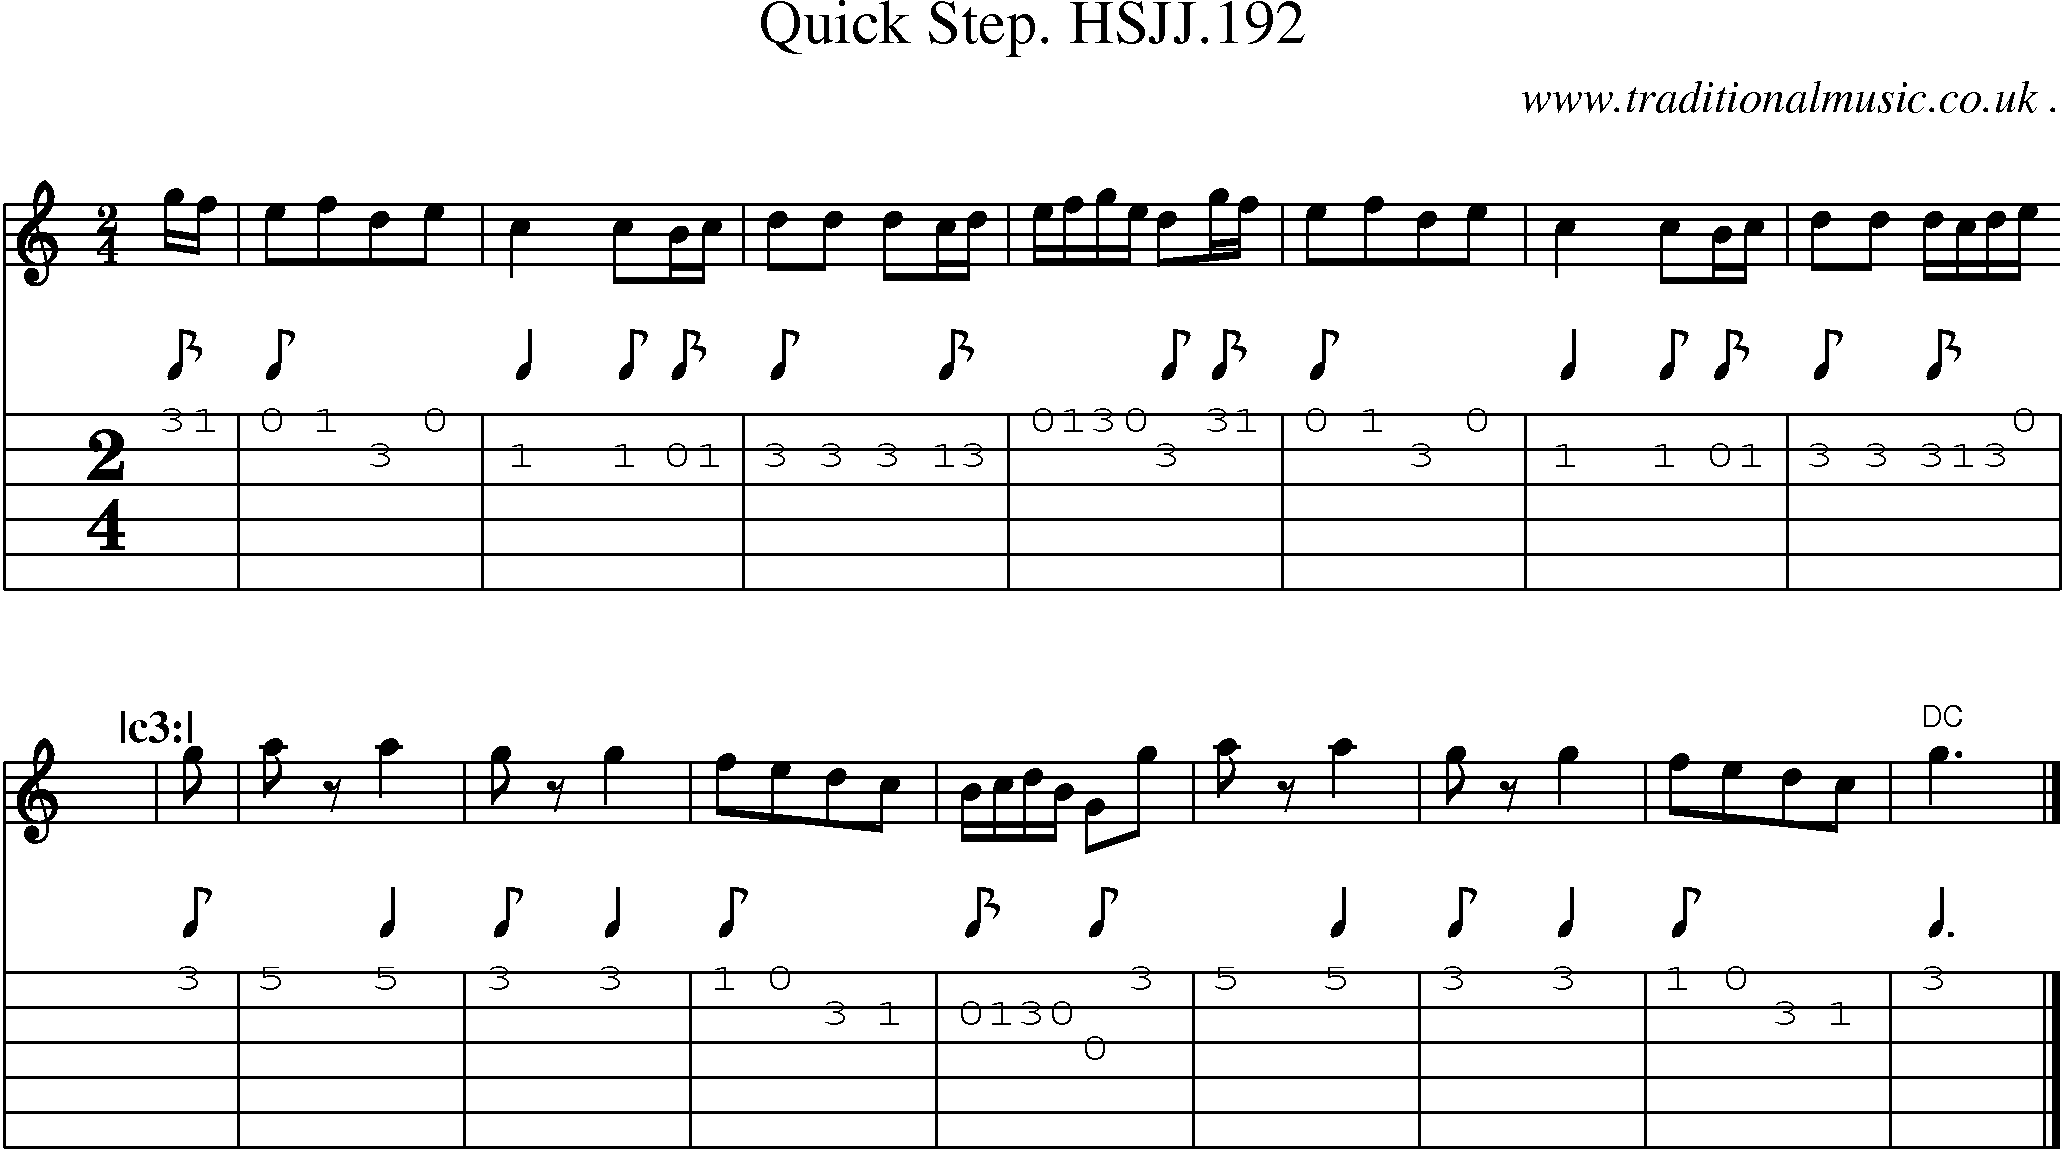 Sheet-music  score, Chords and Guitar Tabs for Quick Step Hsjj192